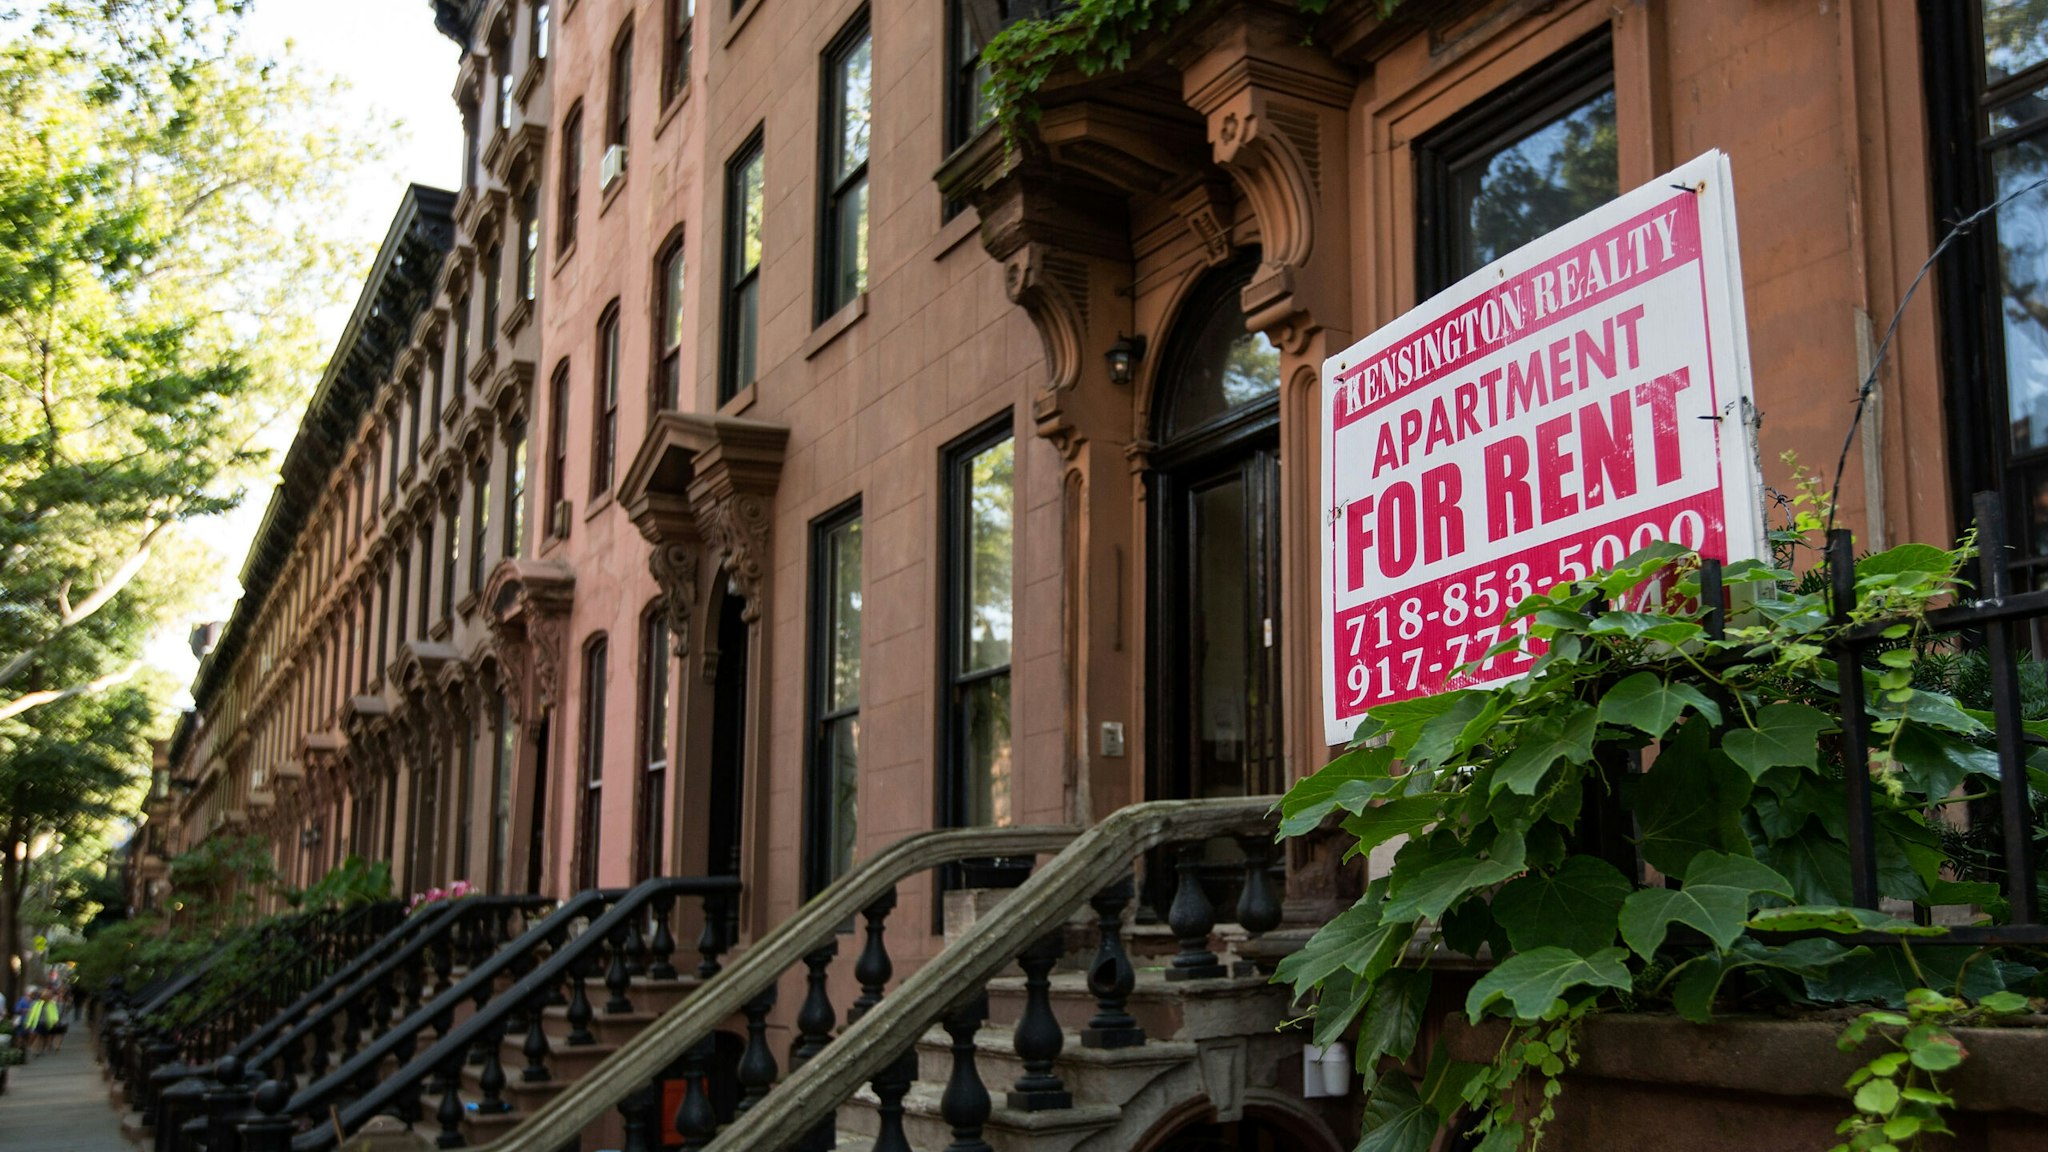 NEW YORK, NY - JUNE 24: A sign advertises an apartment for rent along a row of brownstone townhouses in the Fort Greene neighborhood on June 24, 2016 in the Brooklyn borough of New York City. According to a survey released on Thursday by real-estate firm RealtyTrac, Brooklyn ranked as the most unaffordable place to live in the United States. (Photo by Drew Angerer/Getty Images)